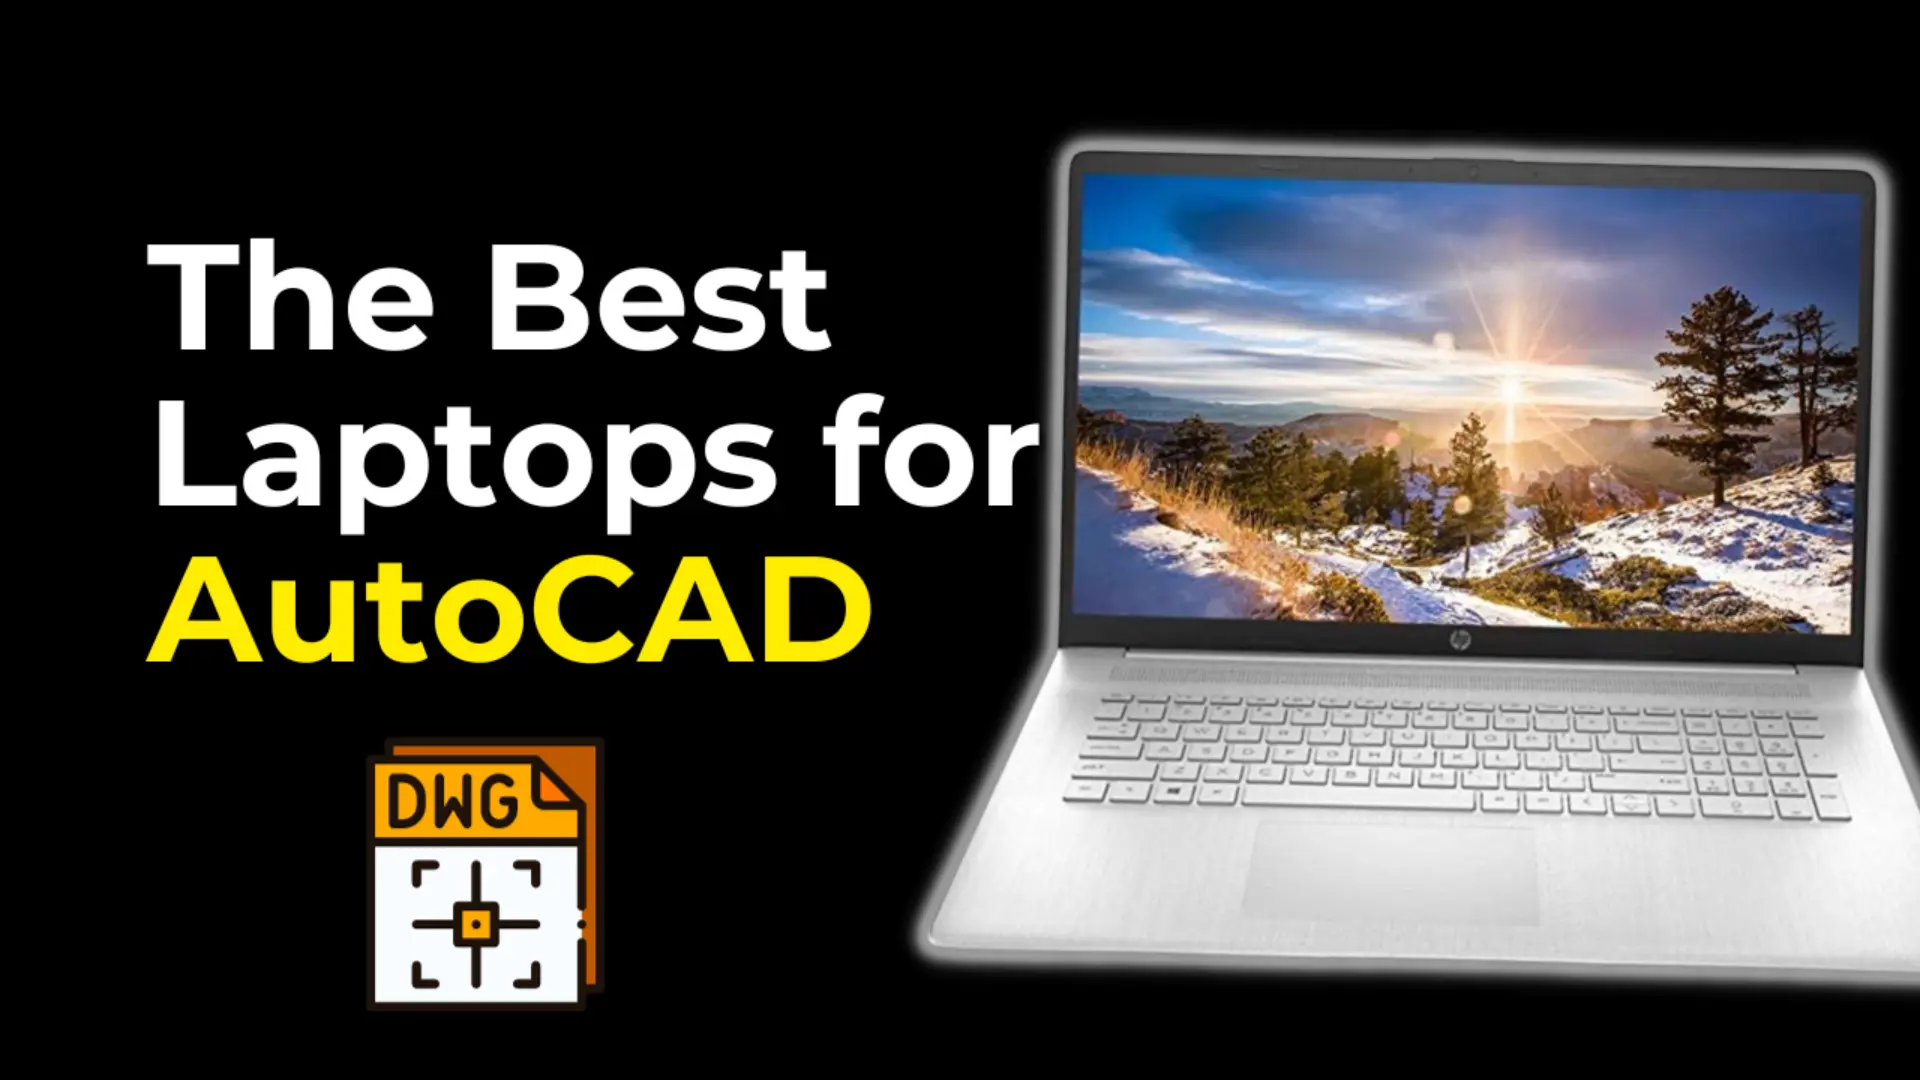 The Best Laptops for AutoCAD